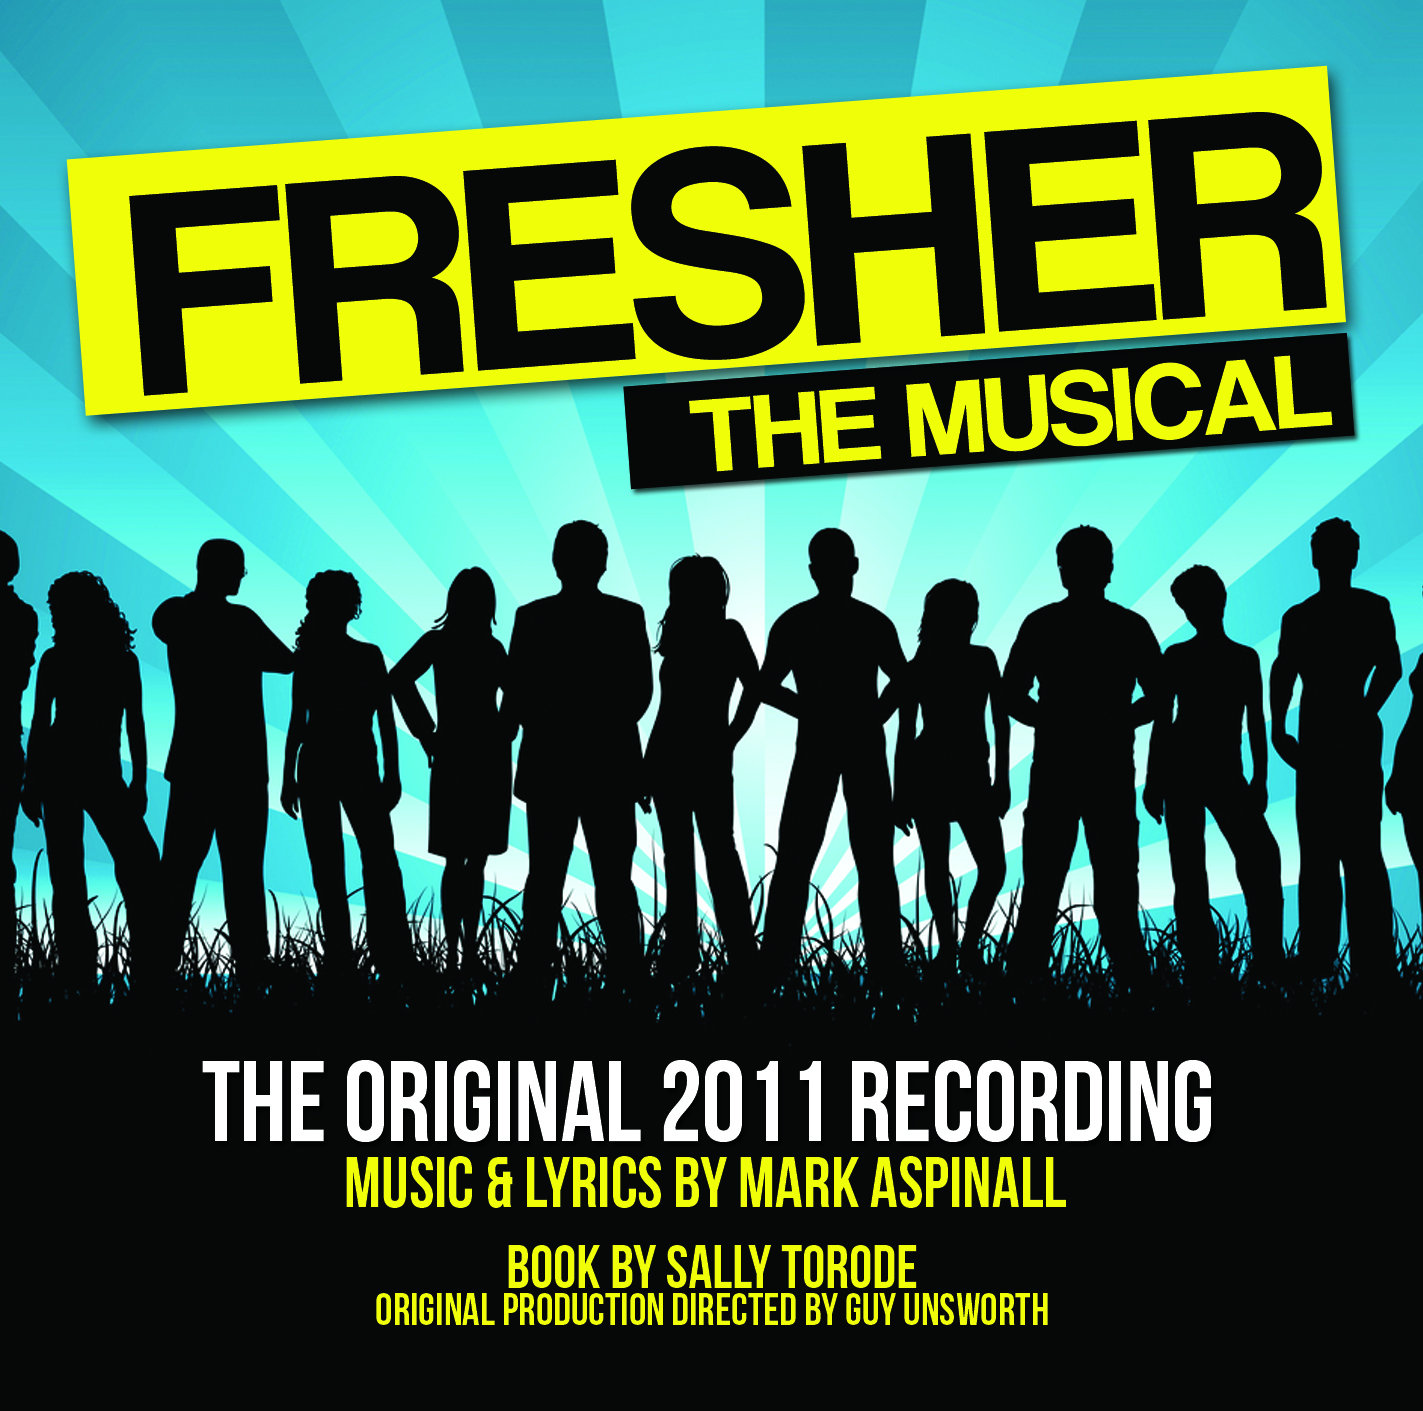 Fresher: The Musical